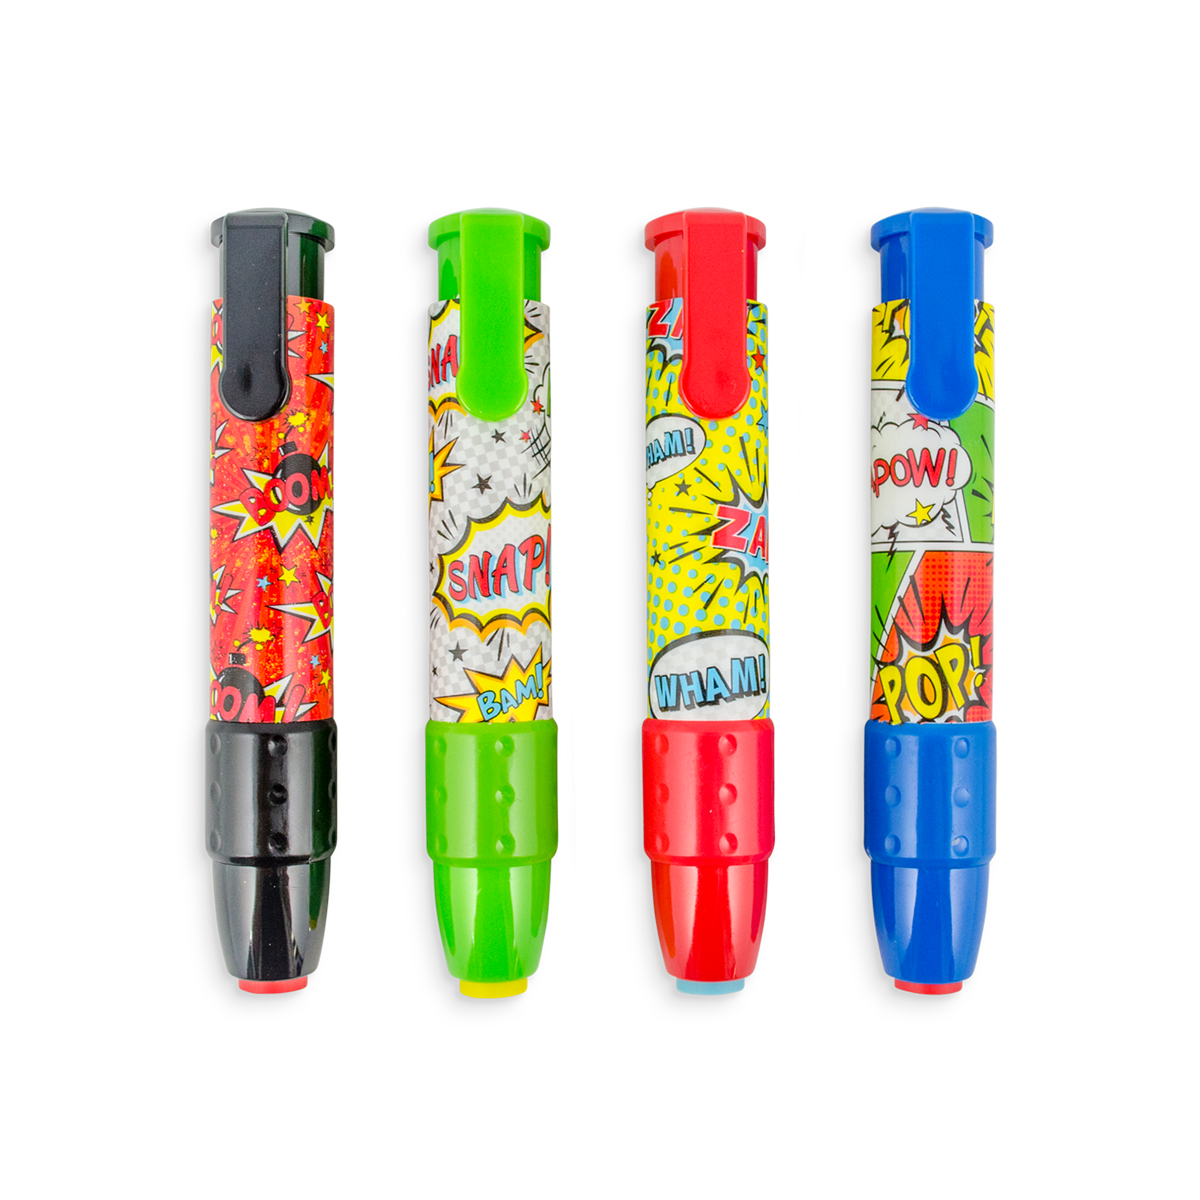 Black, green, red, and blue Comic Attack ClickIt Erasers